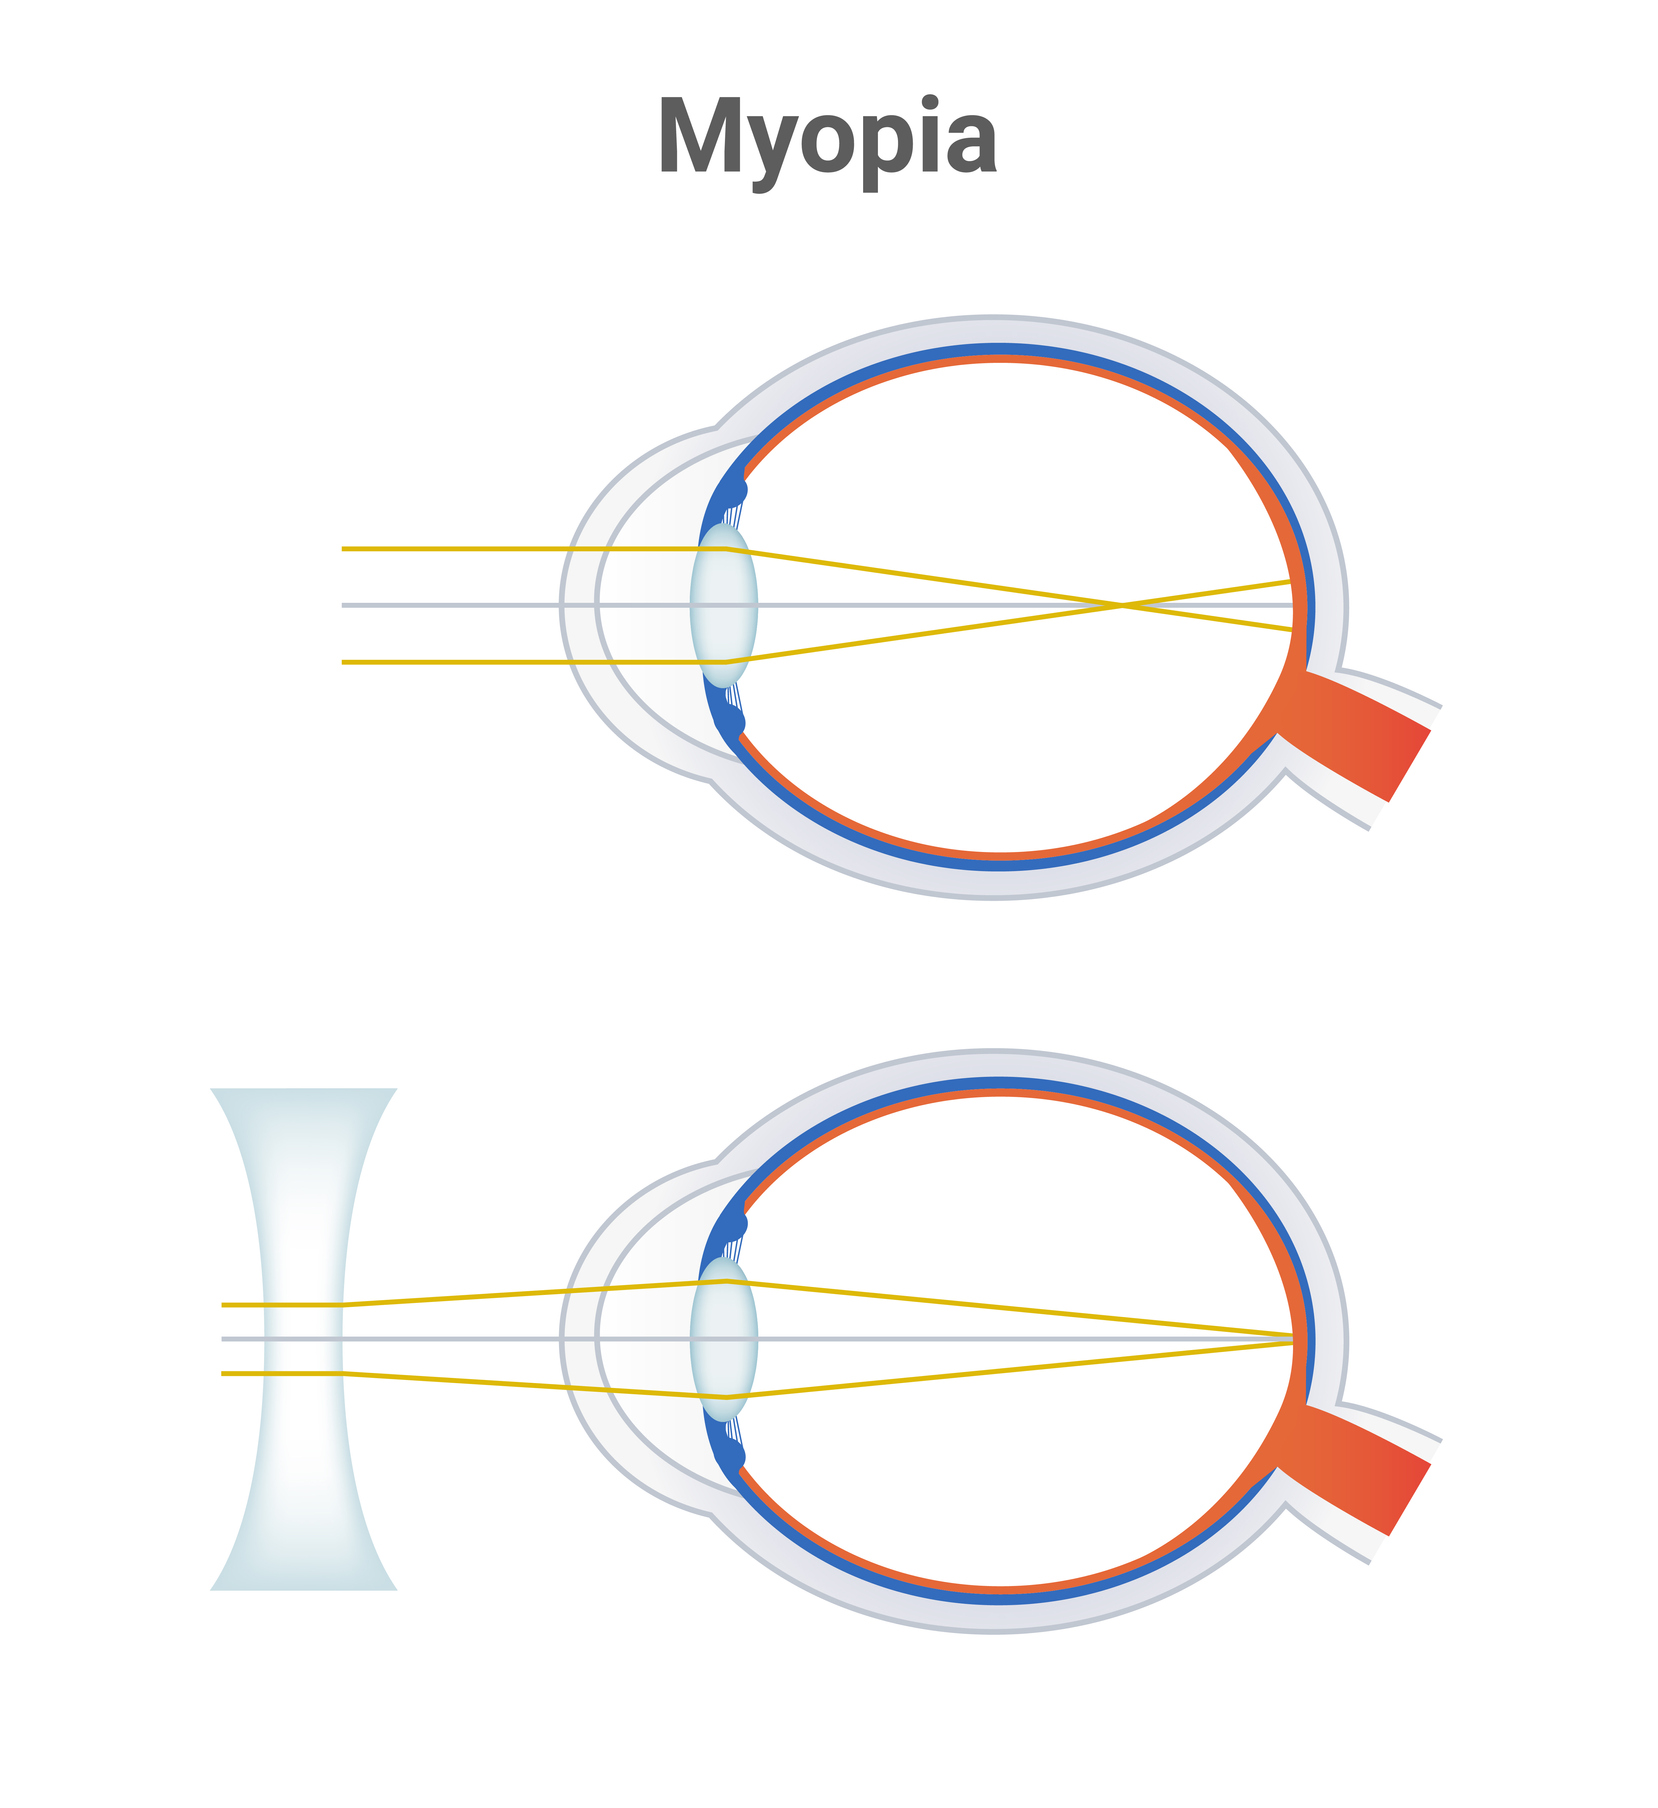 Myopia, short sightedness or near sightedness eye disorder and corrected eye by a minus lens or biconcave negative lens. The light is focused in front of the retina. Illustration is isolated on white